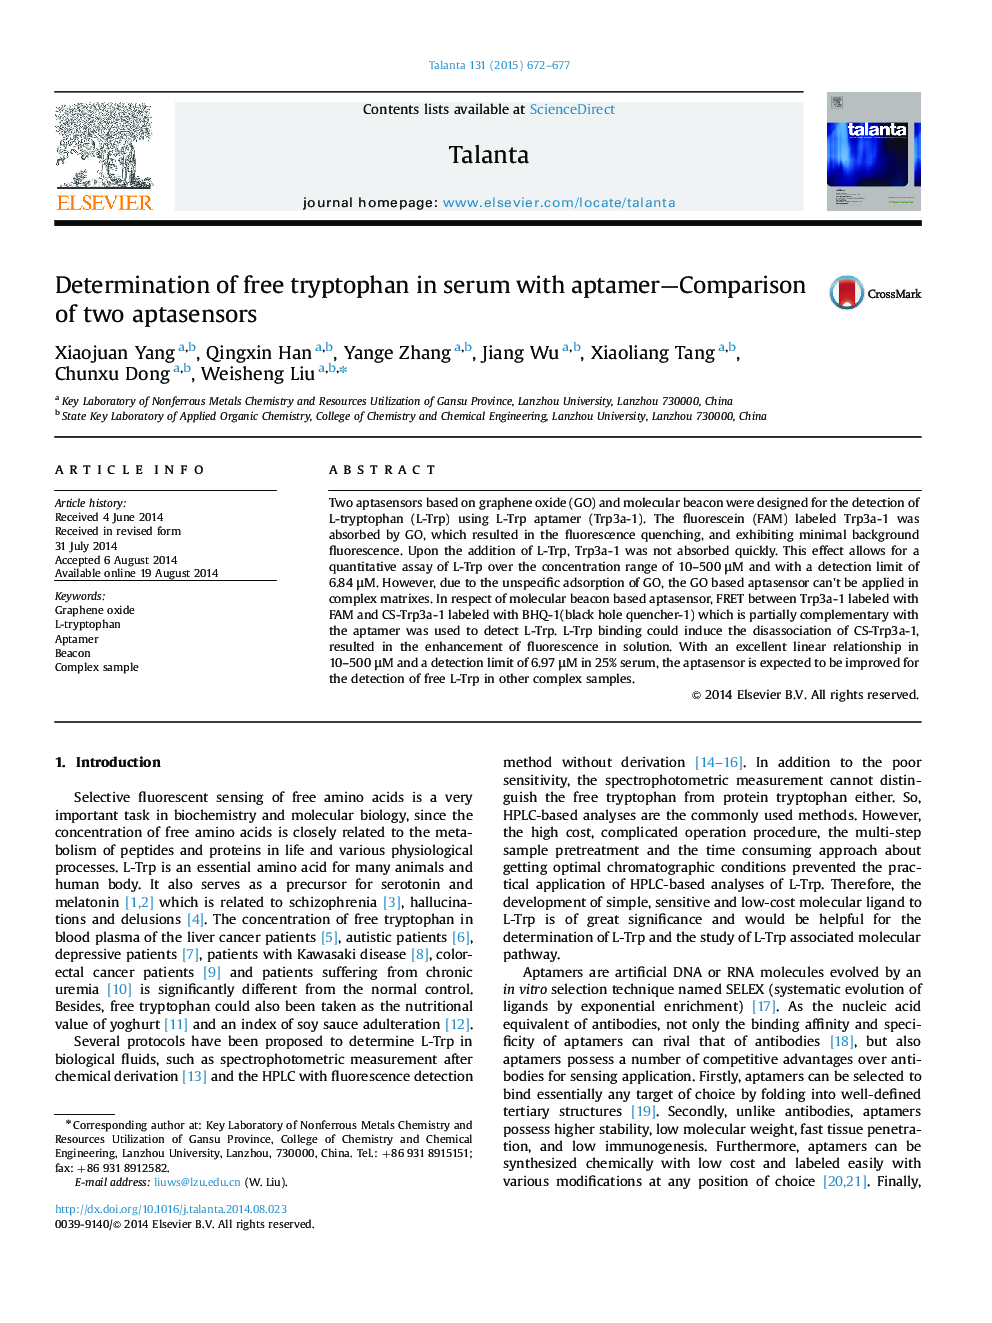 Determination of free tryptophan in serum with aptamer-Comparison of two aptasensors